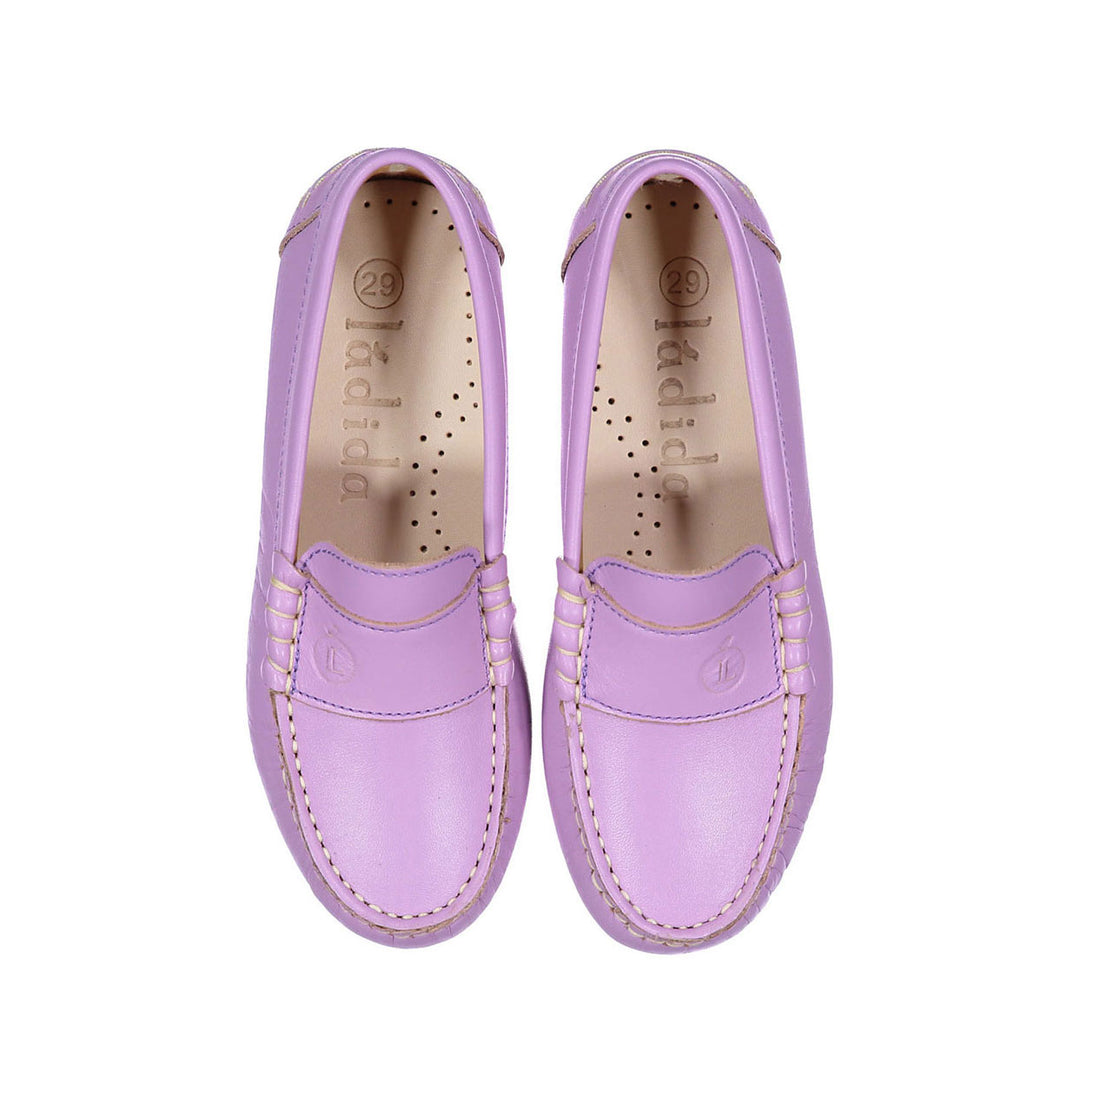 Ladida Lilac Loafer